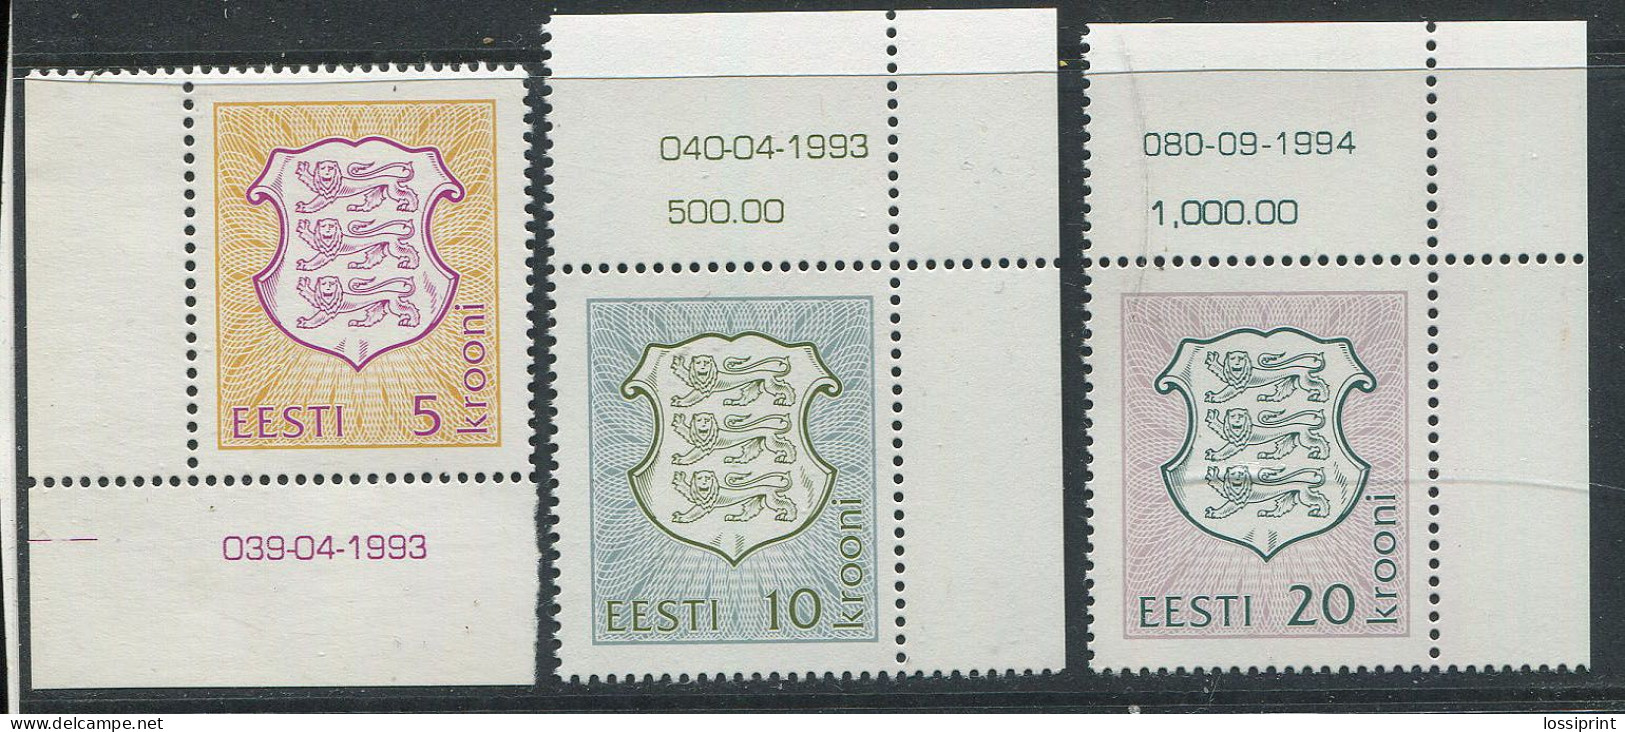 Estonia:Unused Stamps Serie Coat Of Arms, 5, 10 And 20 Krooni, 1993-1994, MNH, Corners - Stamps